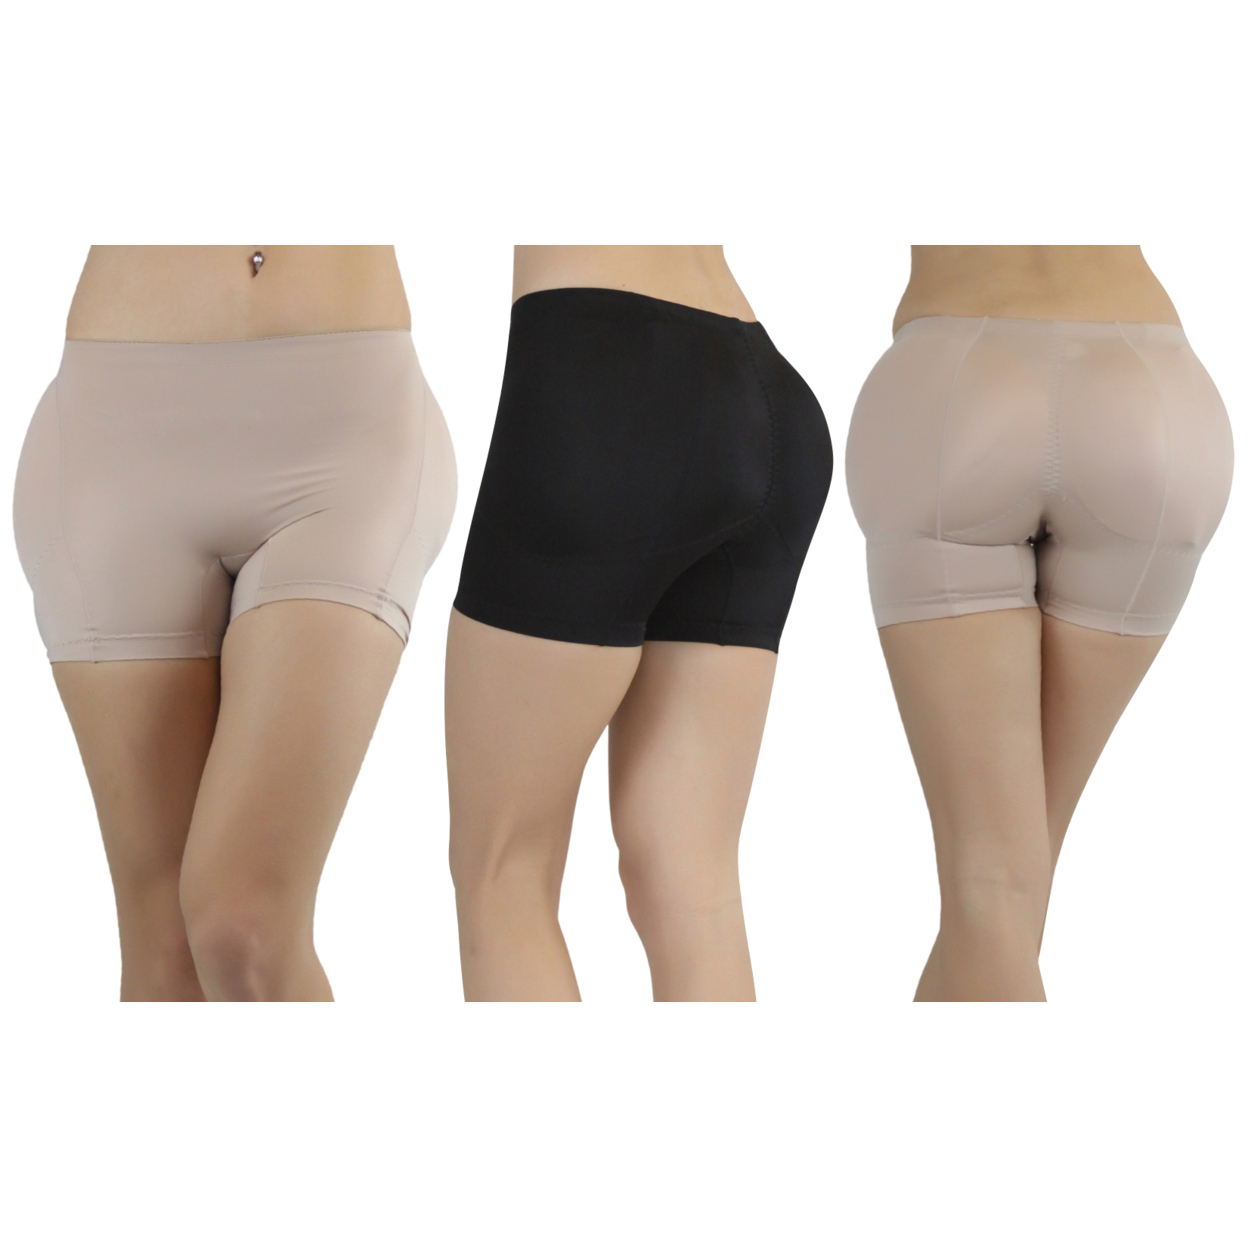 1 Or 2 Pack Of Women Butt And Hip Padded Shaper - Beige & Black, Large